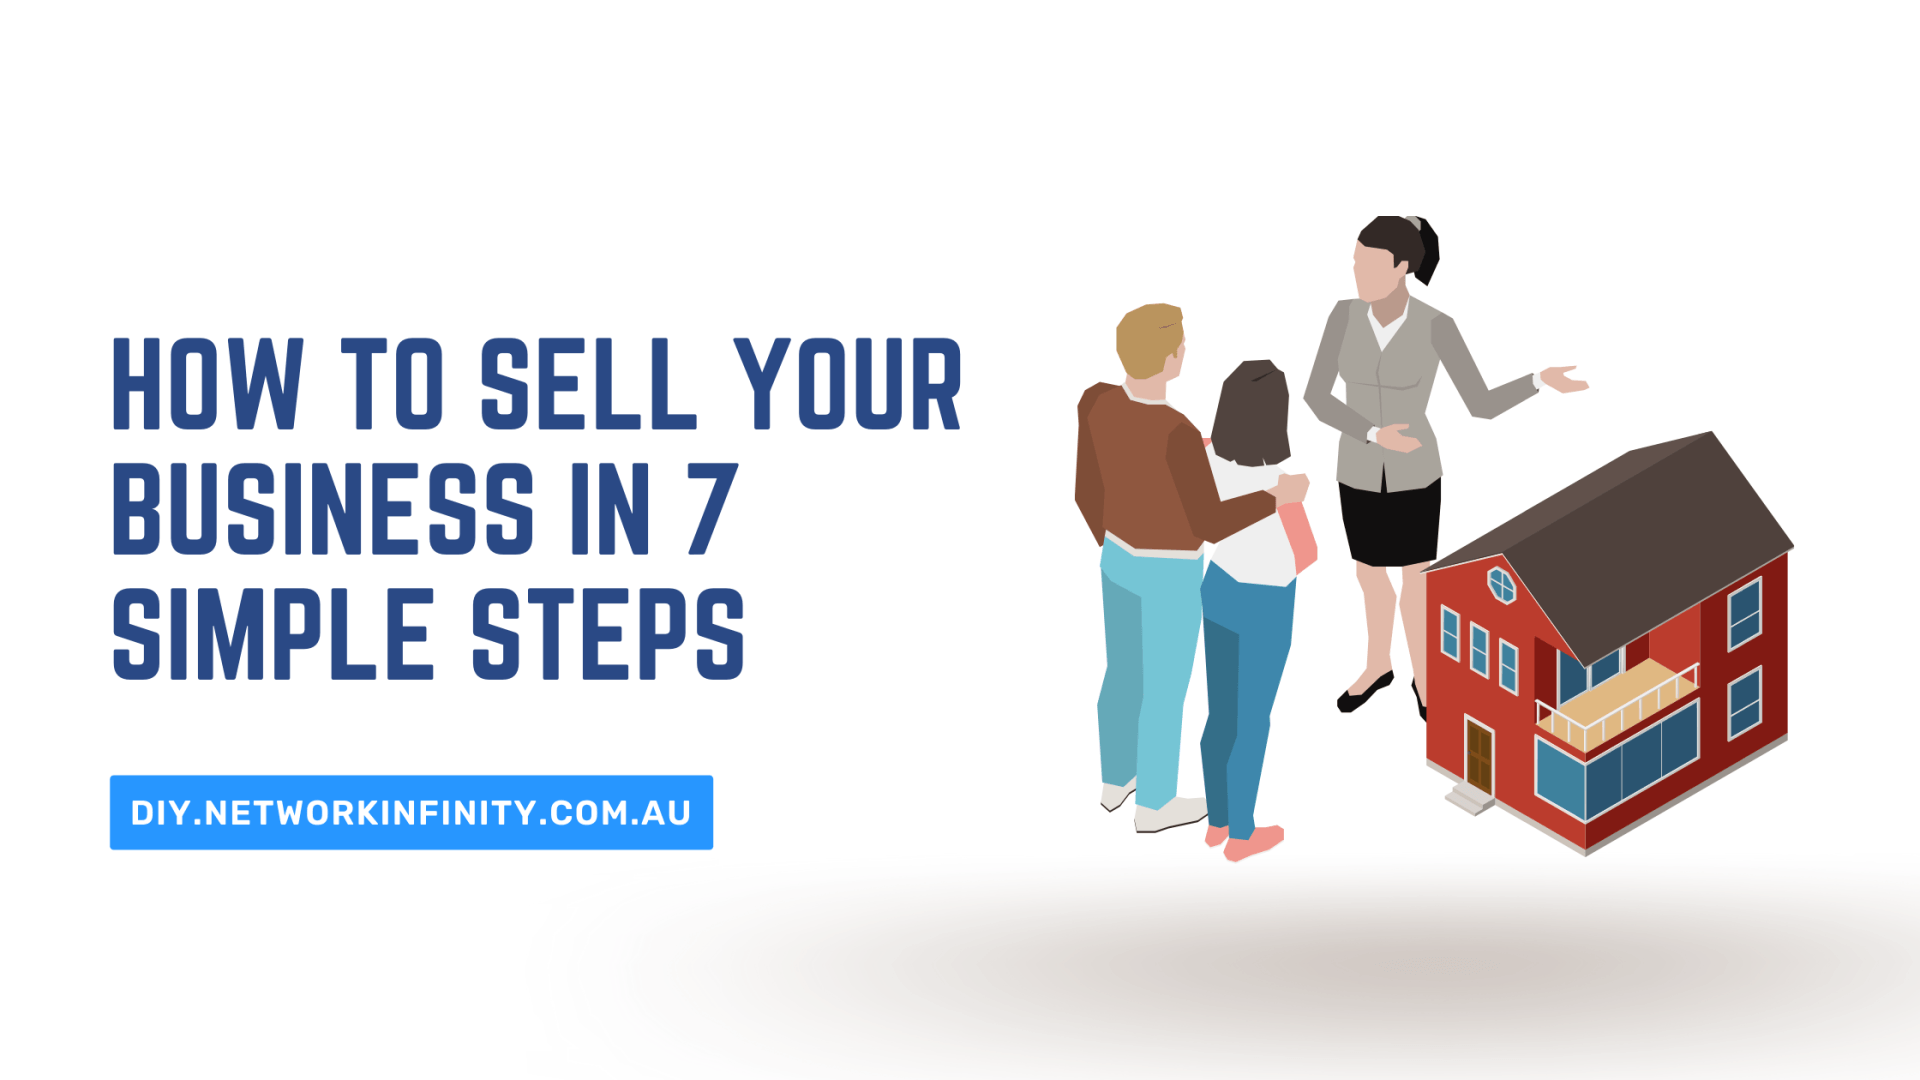 How To Sell Your Business In 7 Simple Steps